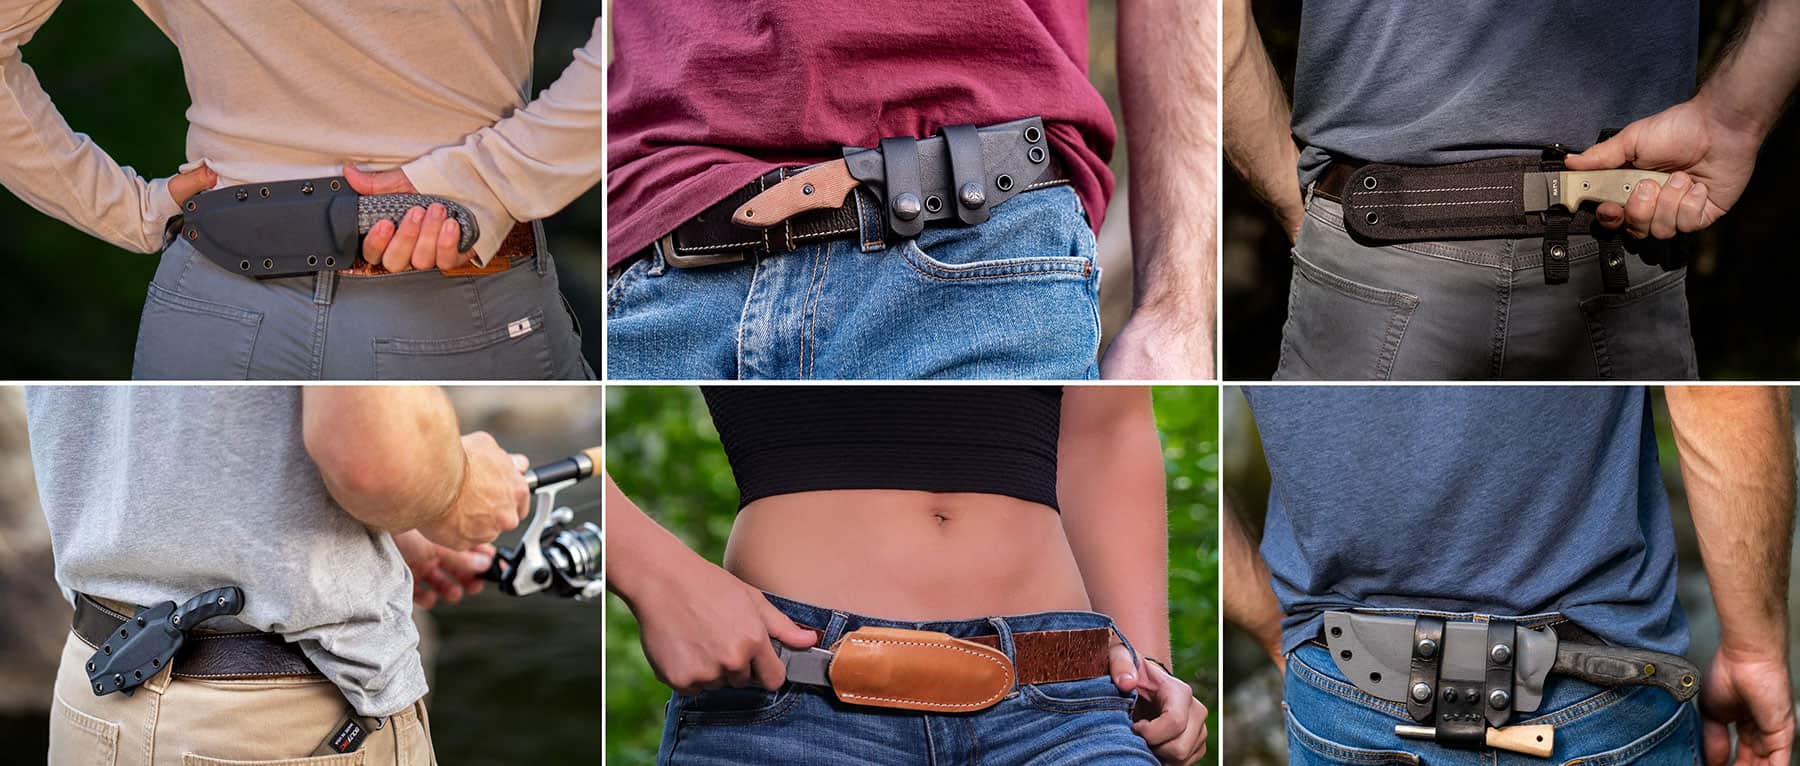 There are a variety of of horizontal carry options available depending on the type of sheath a knife ships with. There are six variations shown in this image.